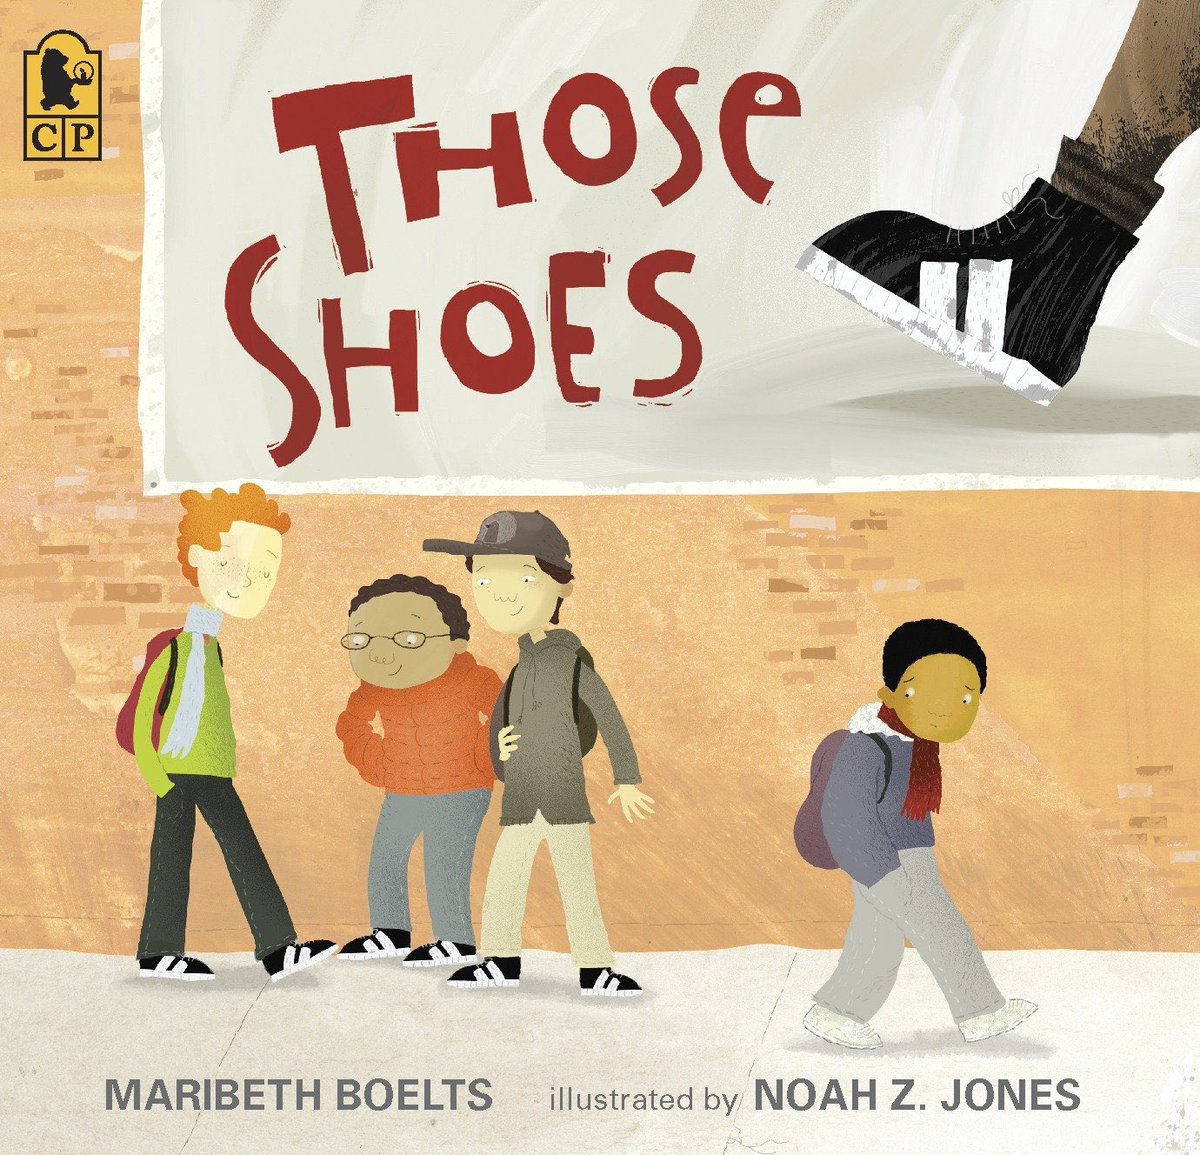 A few years ago, a TC staff developer introduced me to the incredible book Those Shoes. This morning I found out the author is from my hometown! You inspire me, @maribethboelts! Thanks for writing one of the best #firstlines. ‘Black high tops. Two white stripes.’